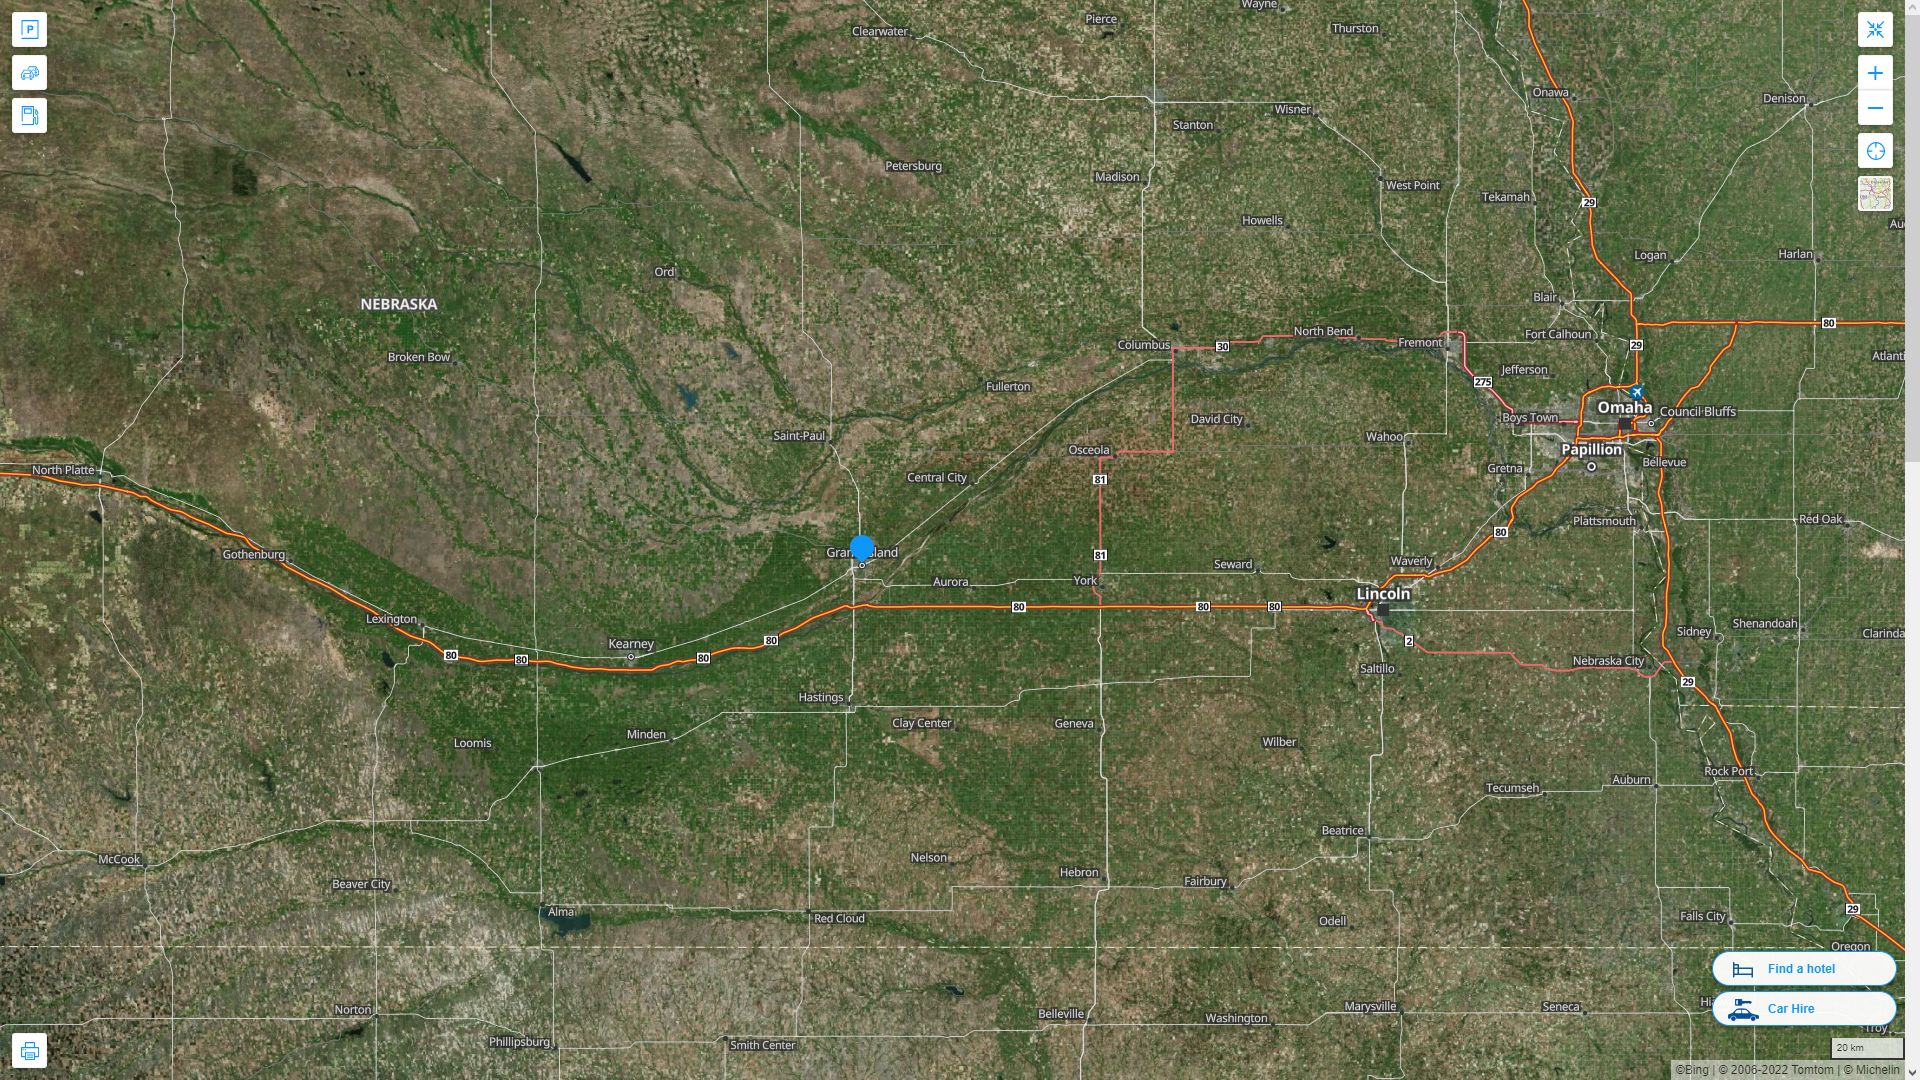 Grand Island Nebraska Highway and Road Map with Satellite View